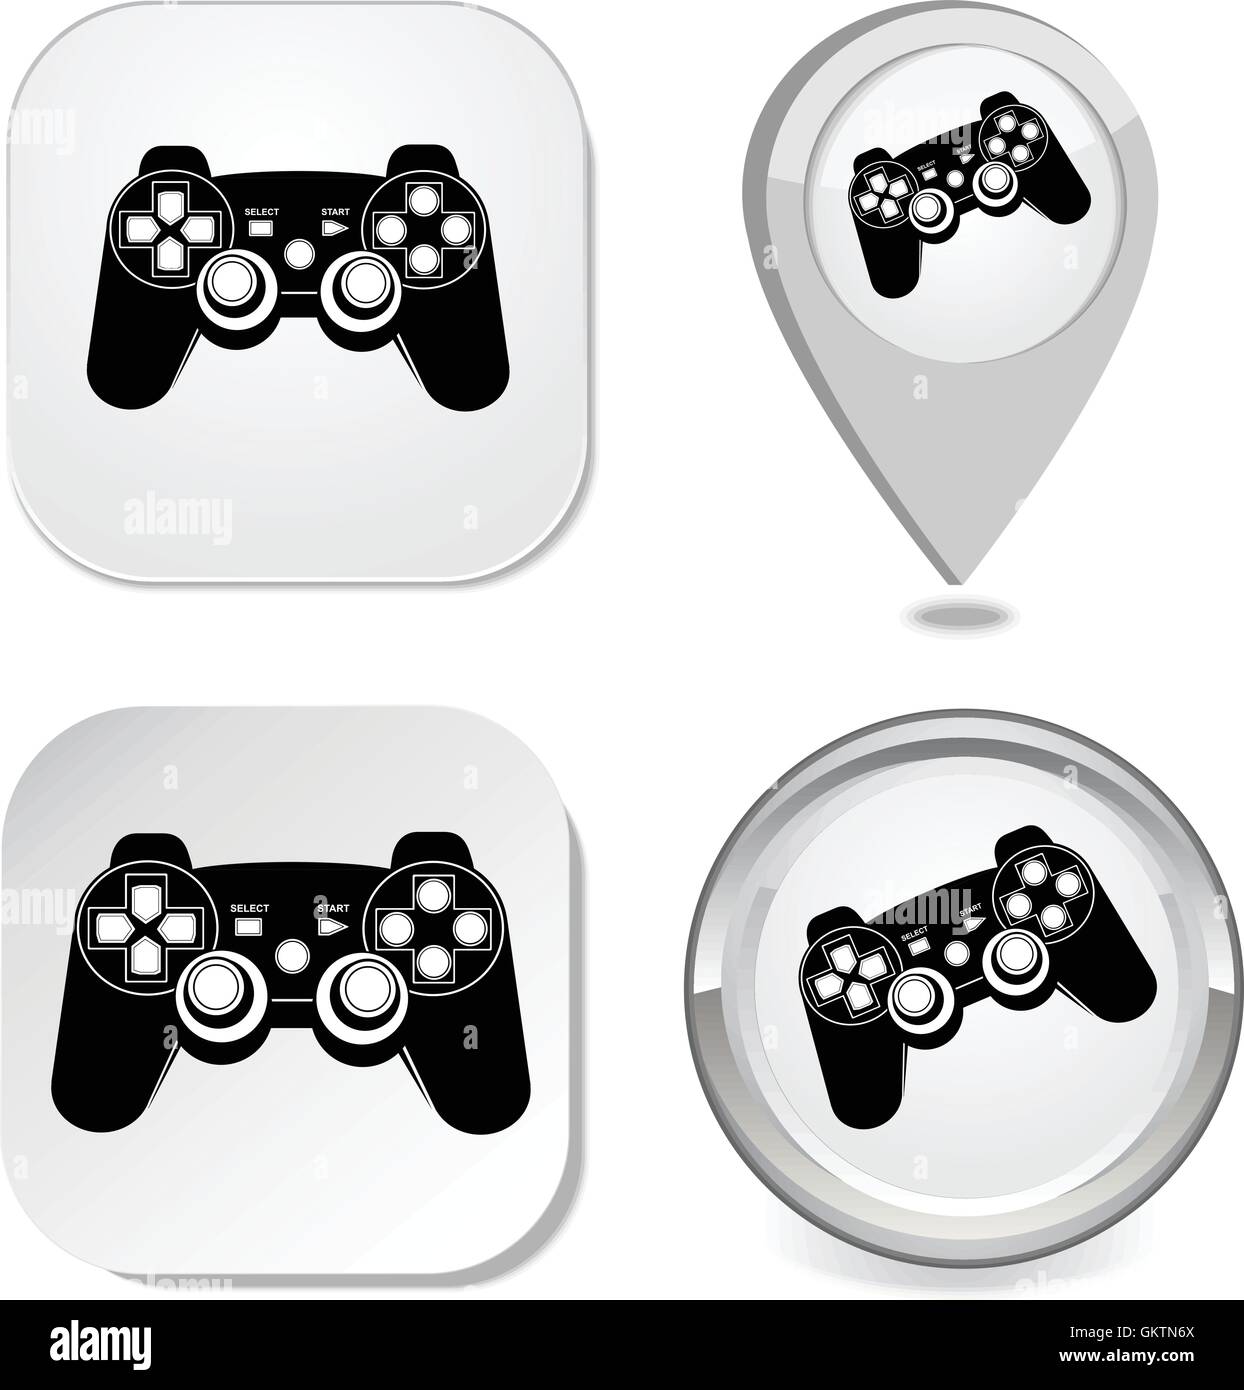 Game pad icon Stock Vector